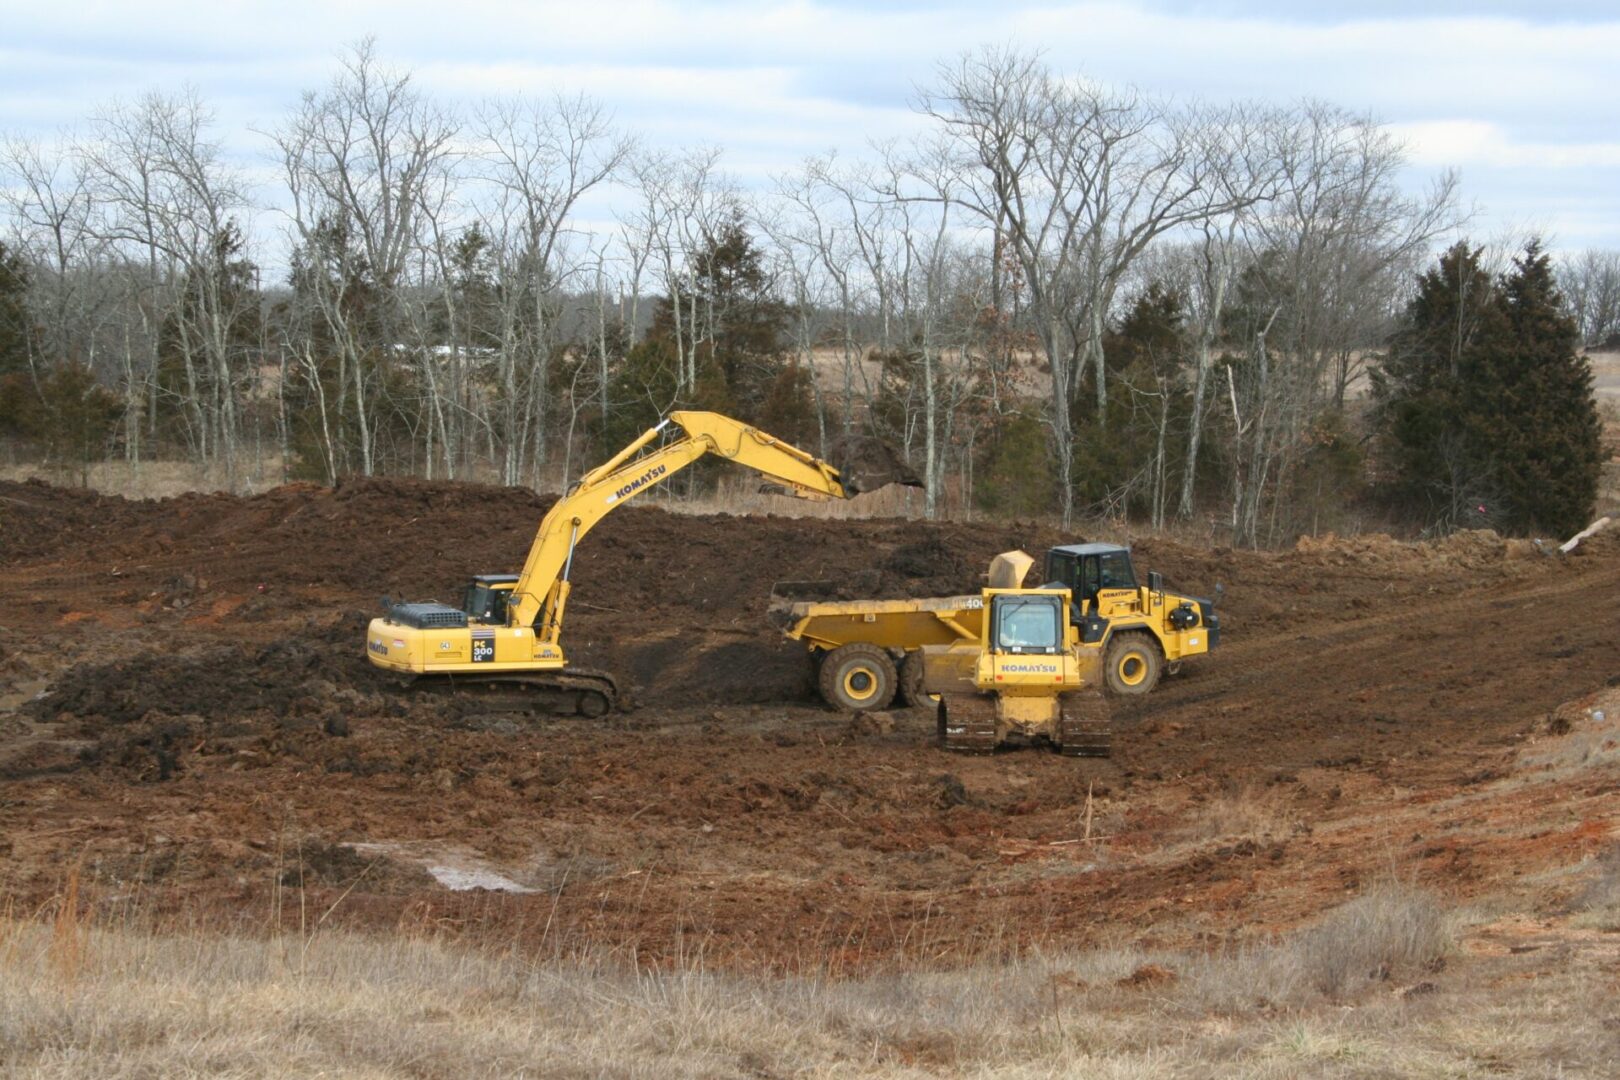 An excavator loading soil into a dump truck at a construction site.